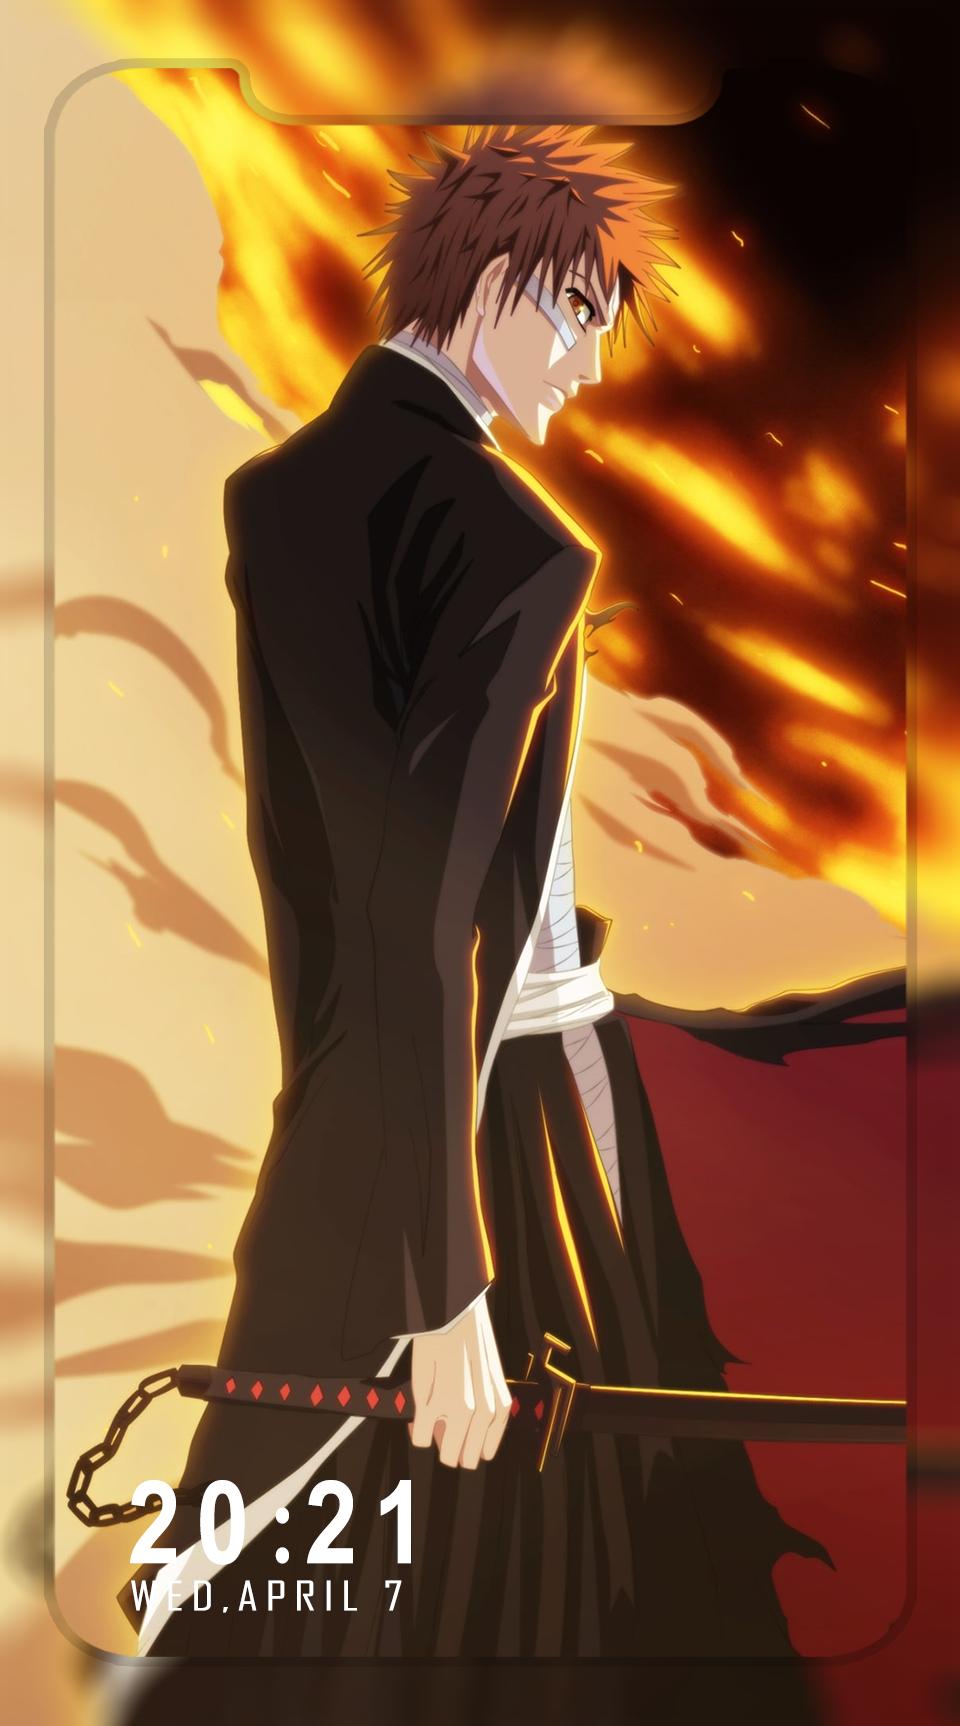 Bleach Anime Wallpaper For Android Apk Download